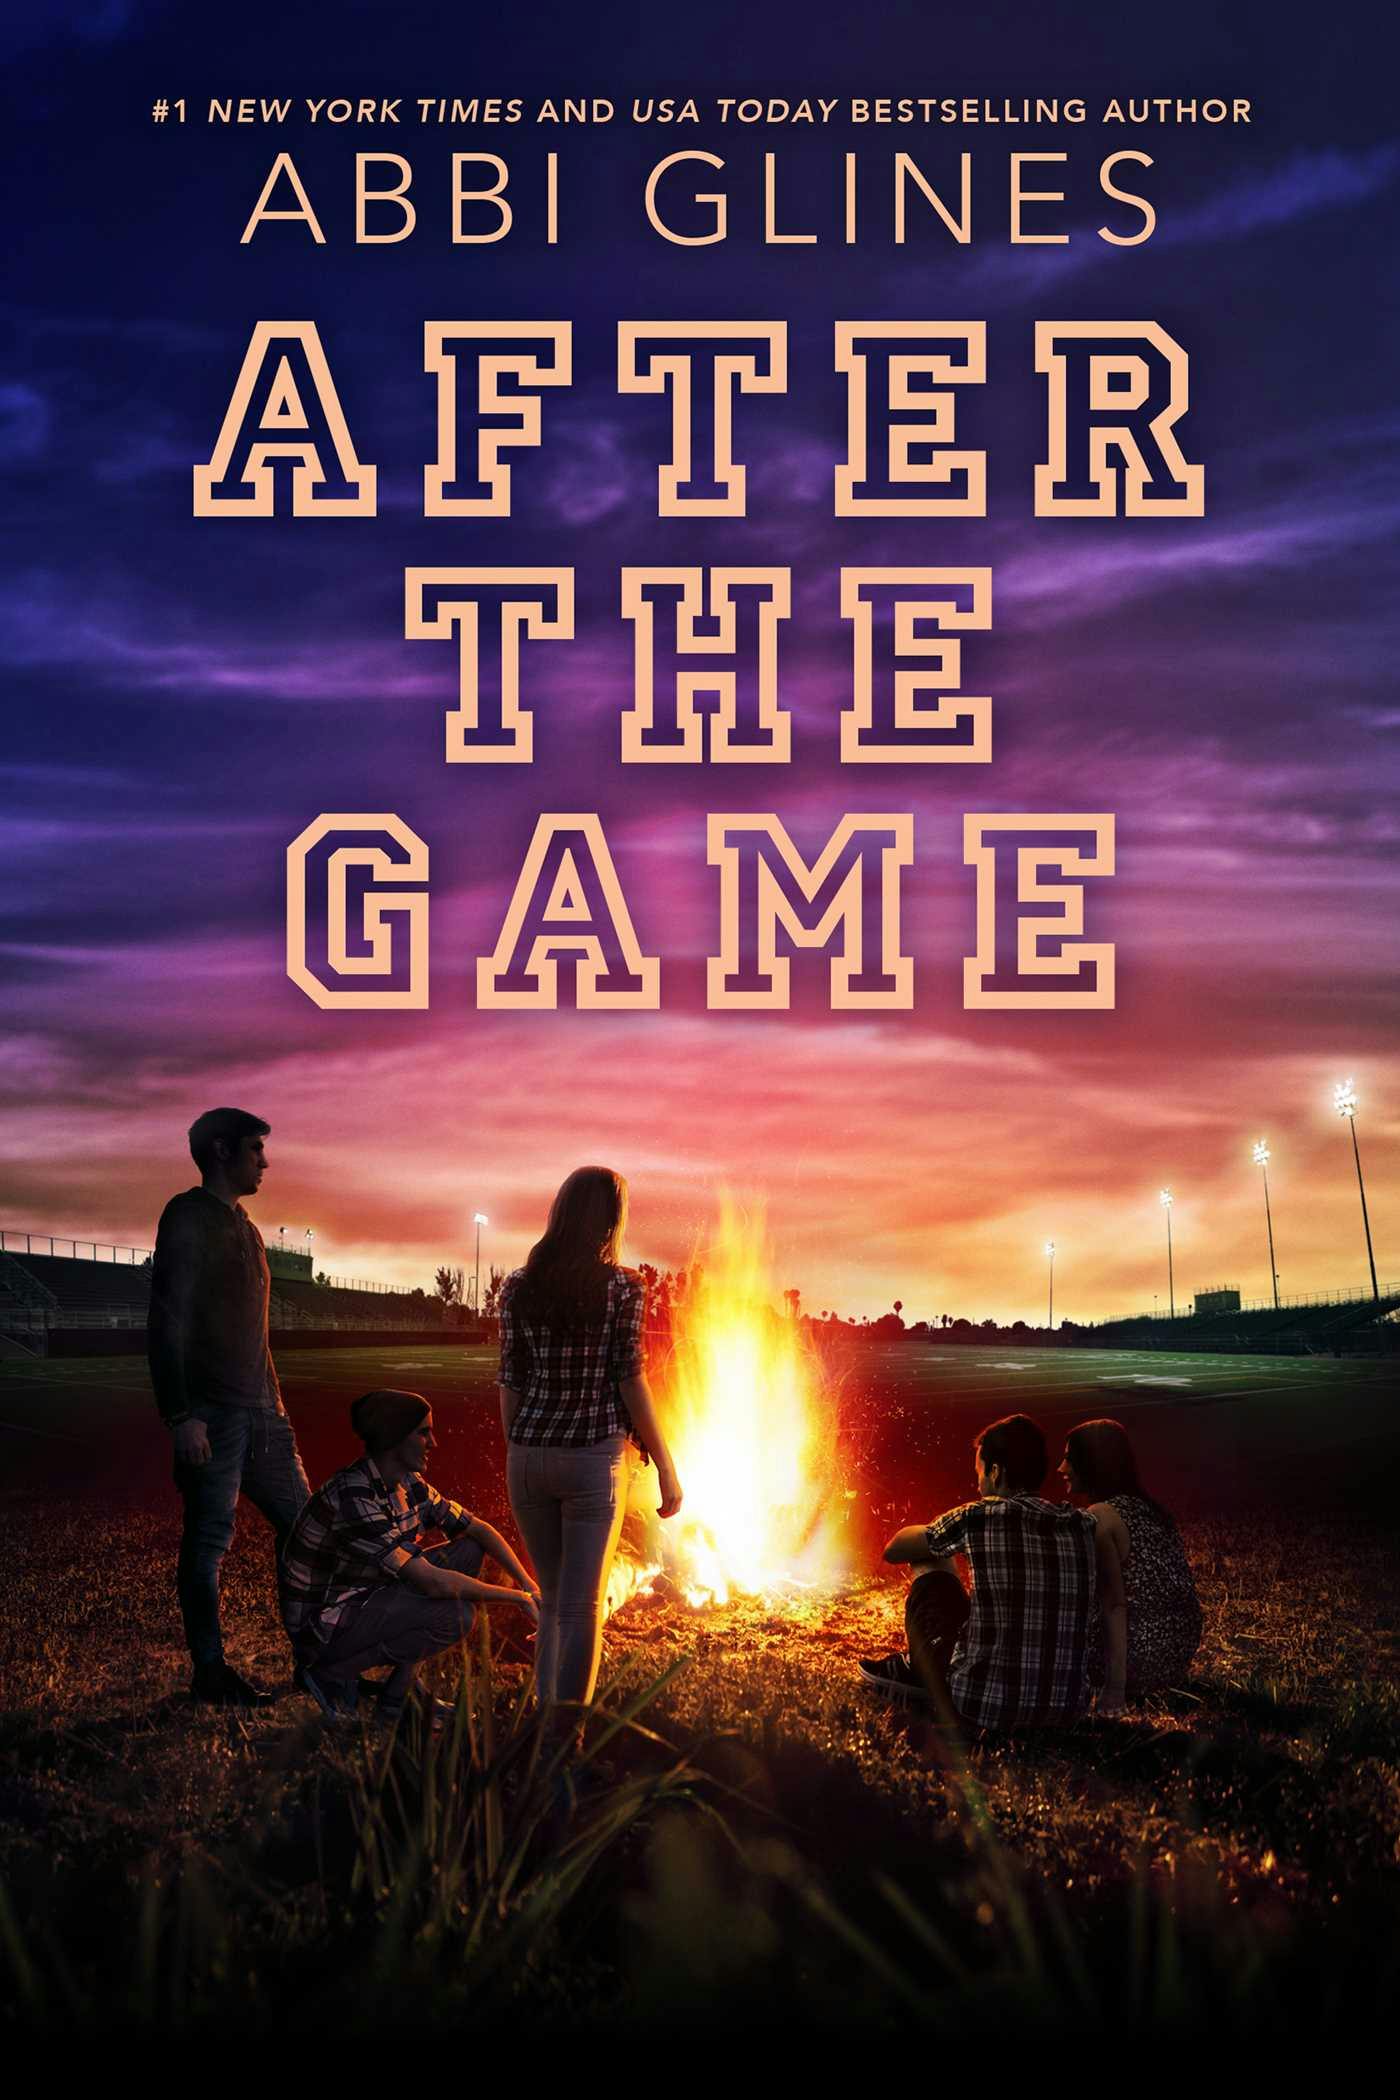 After the Game - Abbi Glines